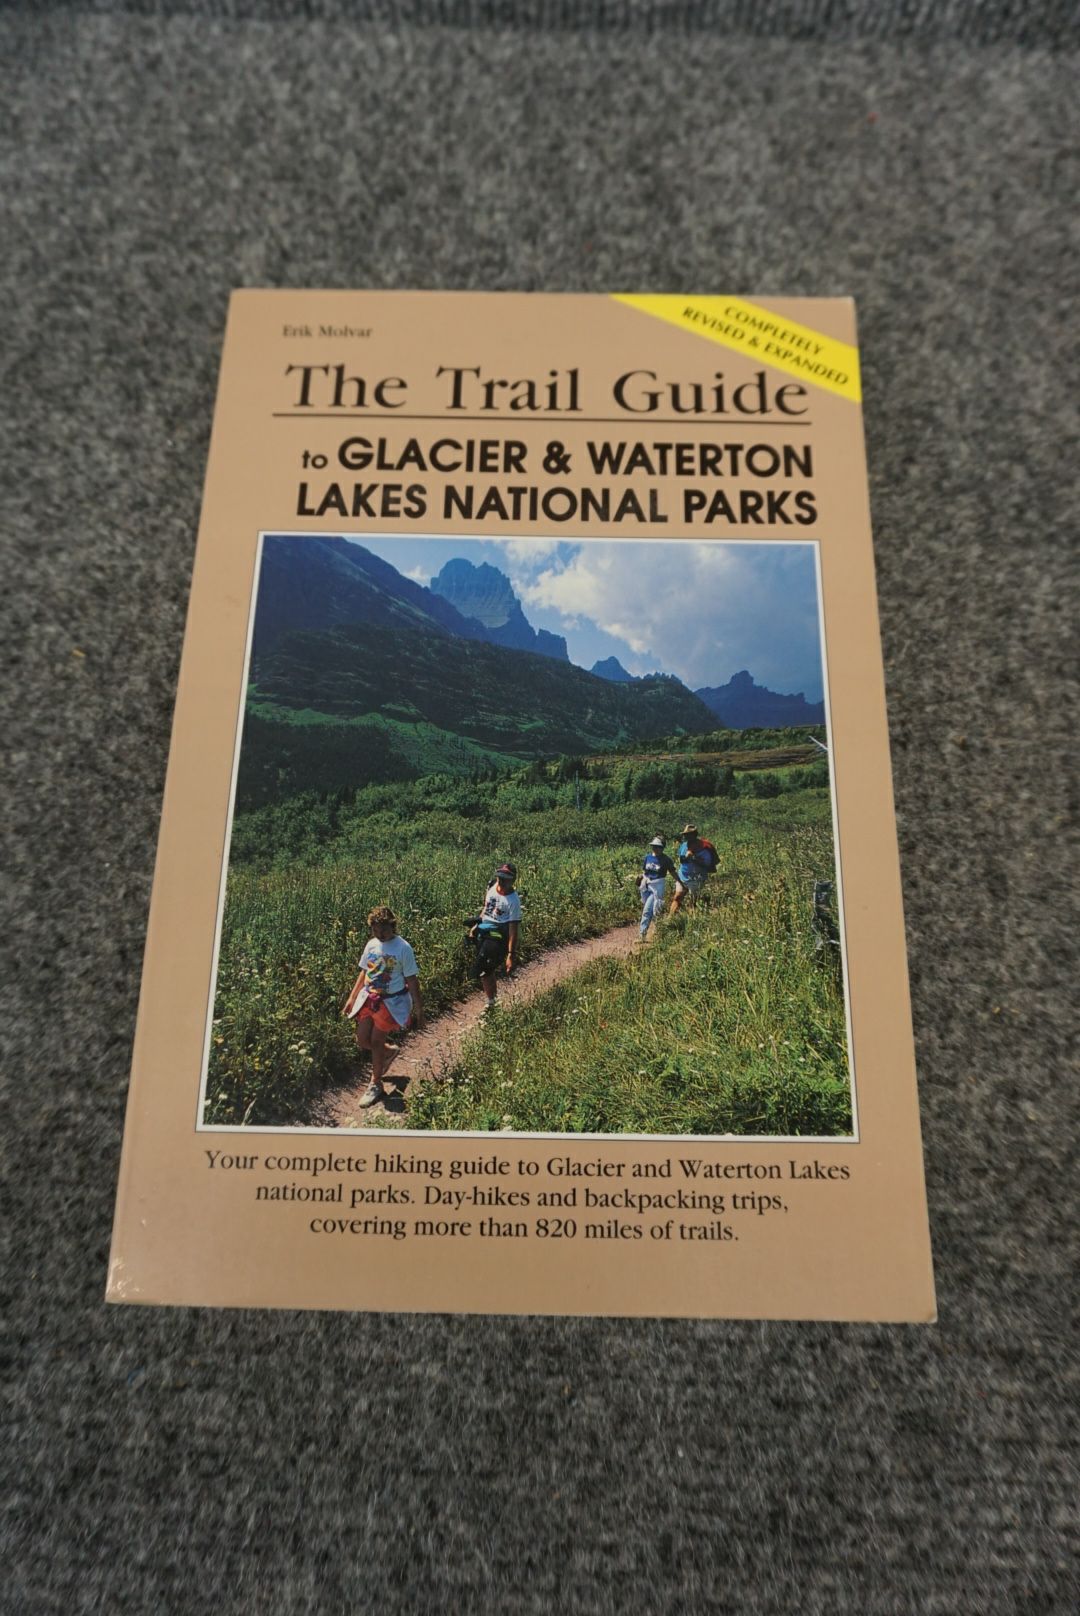 The Trail Guide to Glacier and Waterton Lakes National Park